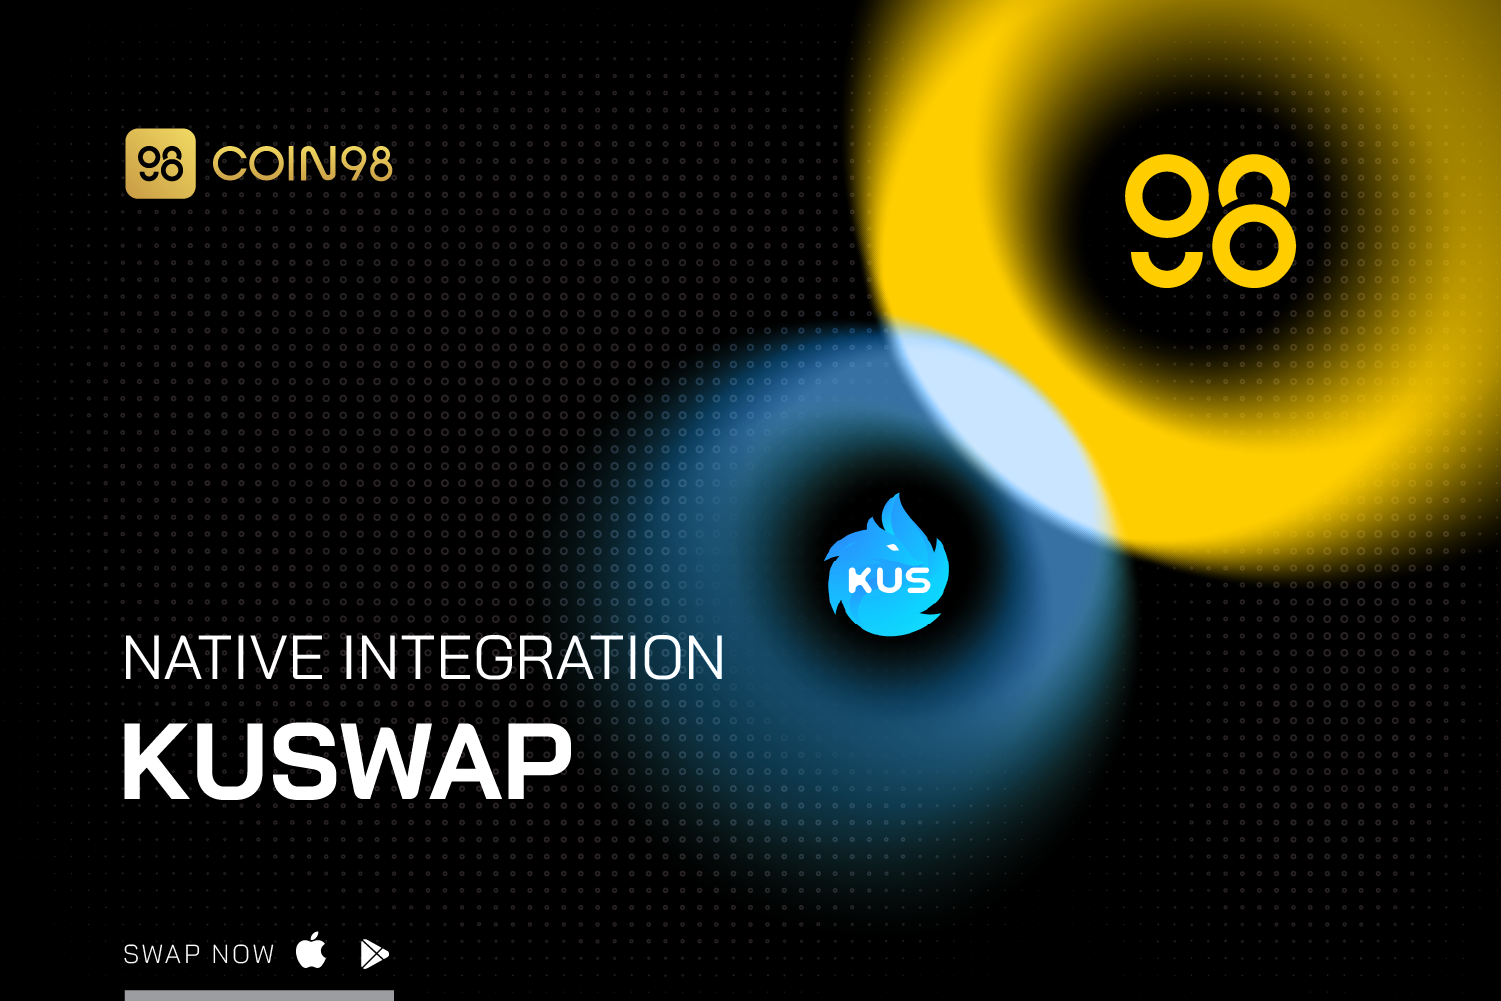 Coin98 integrates KuSwap to native swap for the trading experience to the leading AMM on the KCC